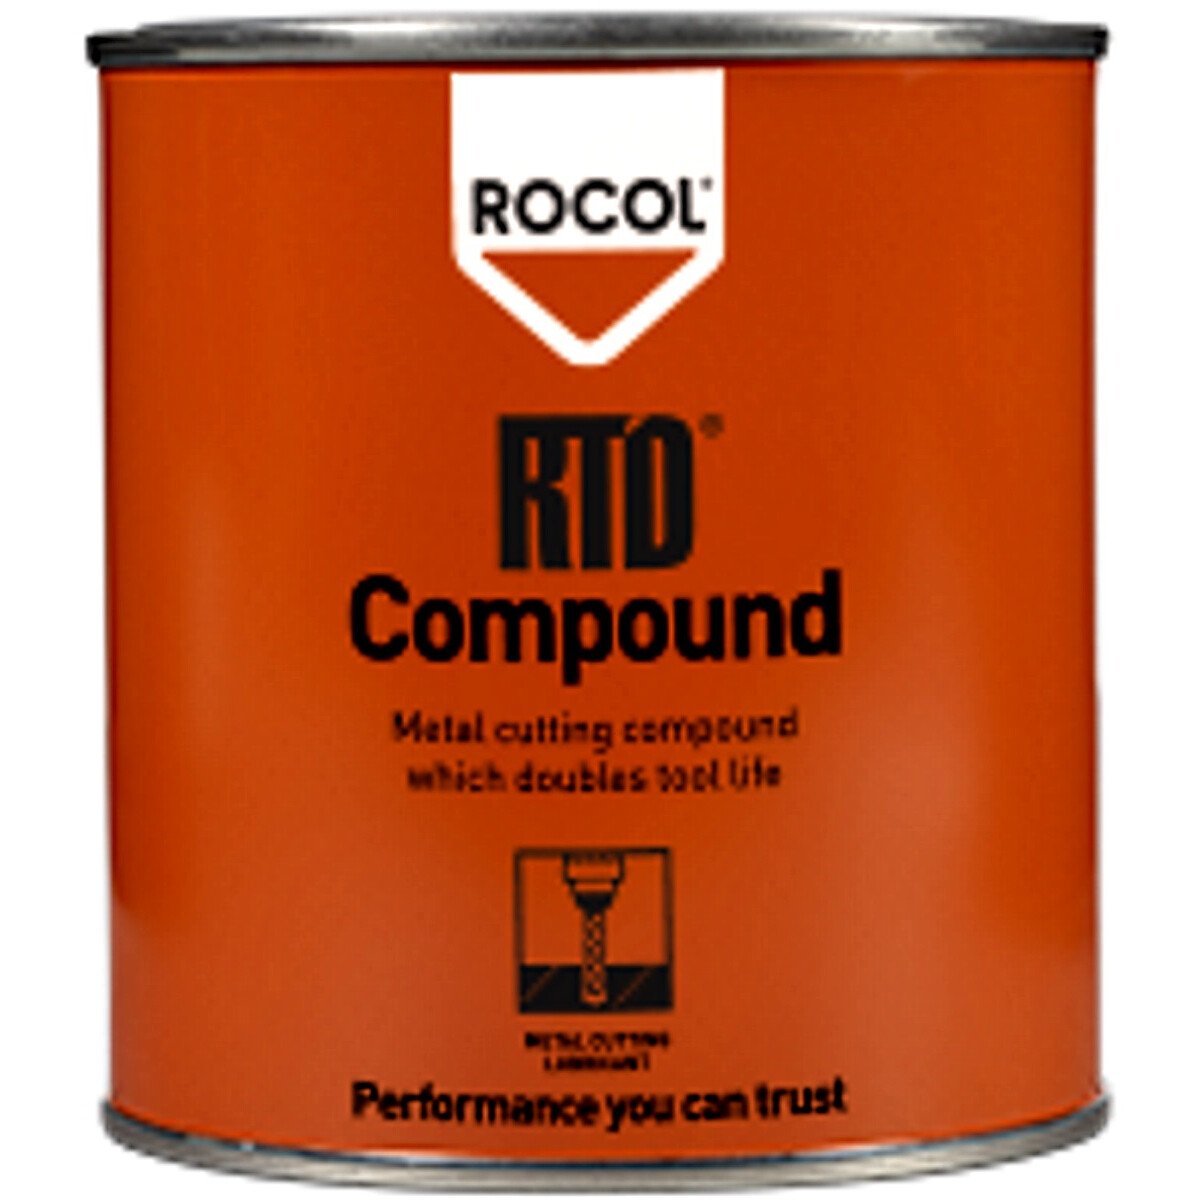 Rocol 53023 RTD Compound - Metal Cutting Compound that Doubles Tool Life 500g